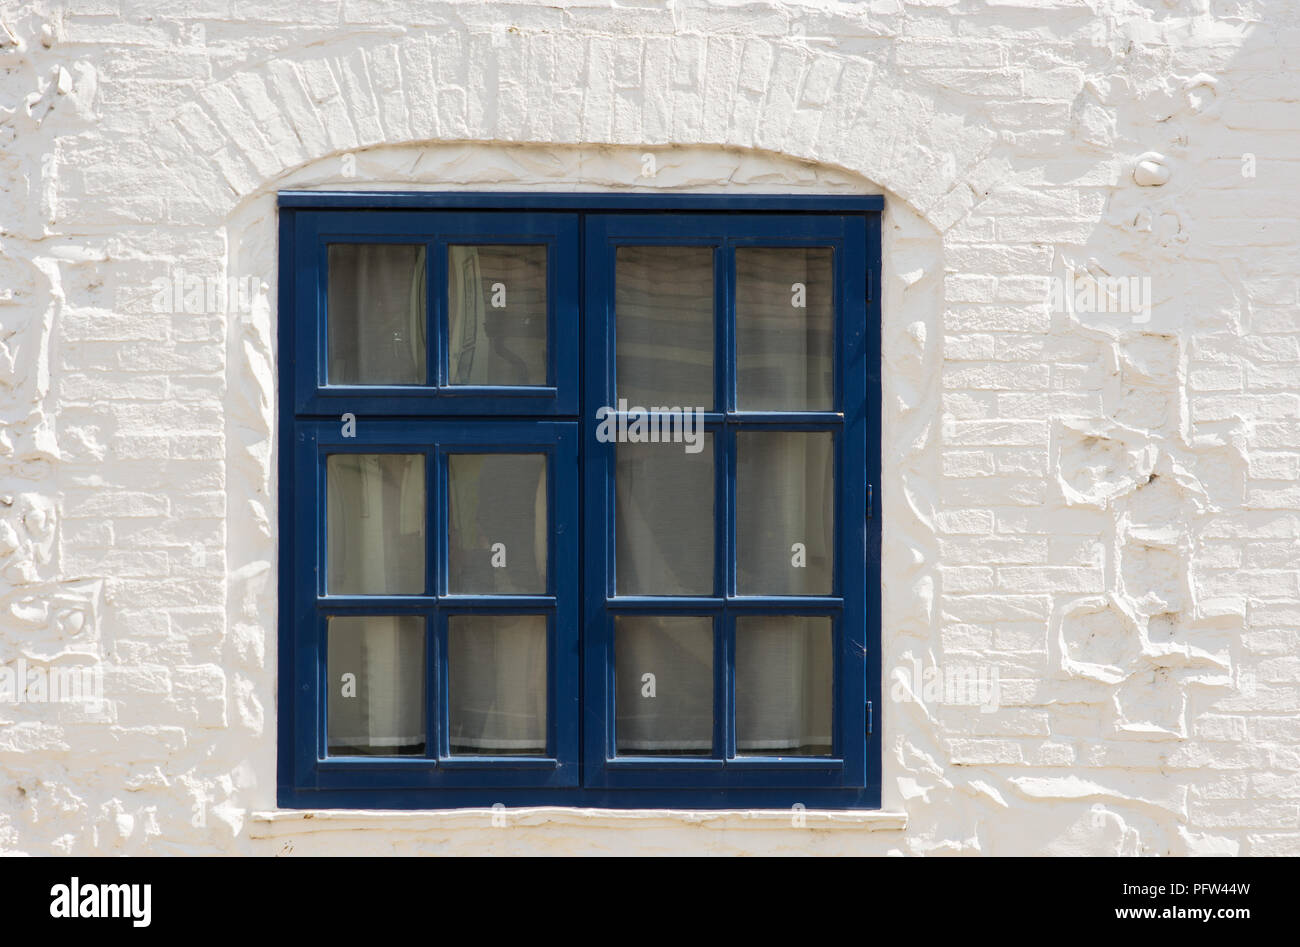 Blue painted wooden window frame set in whitewashed brick and stone wall. Stock Photo